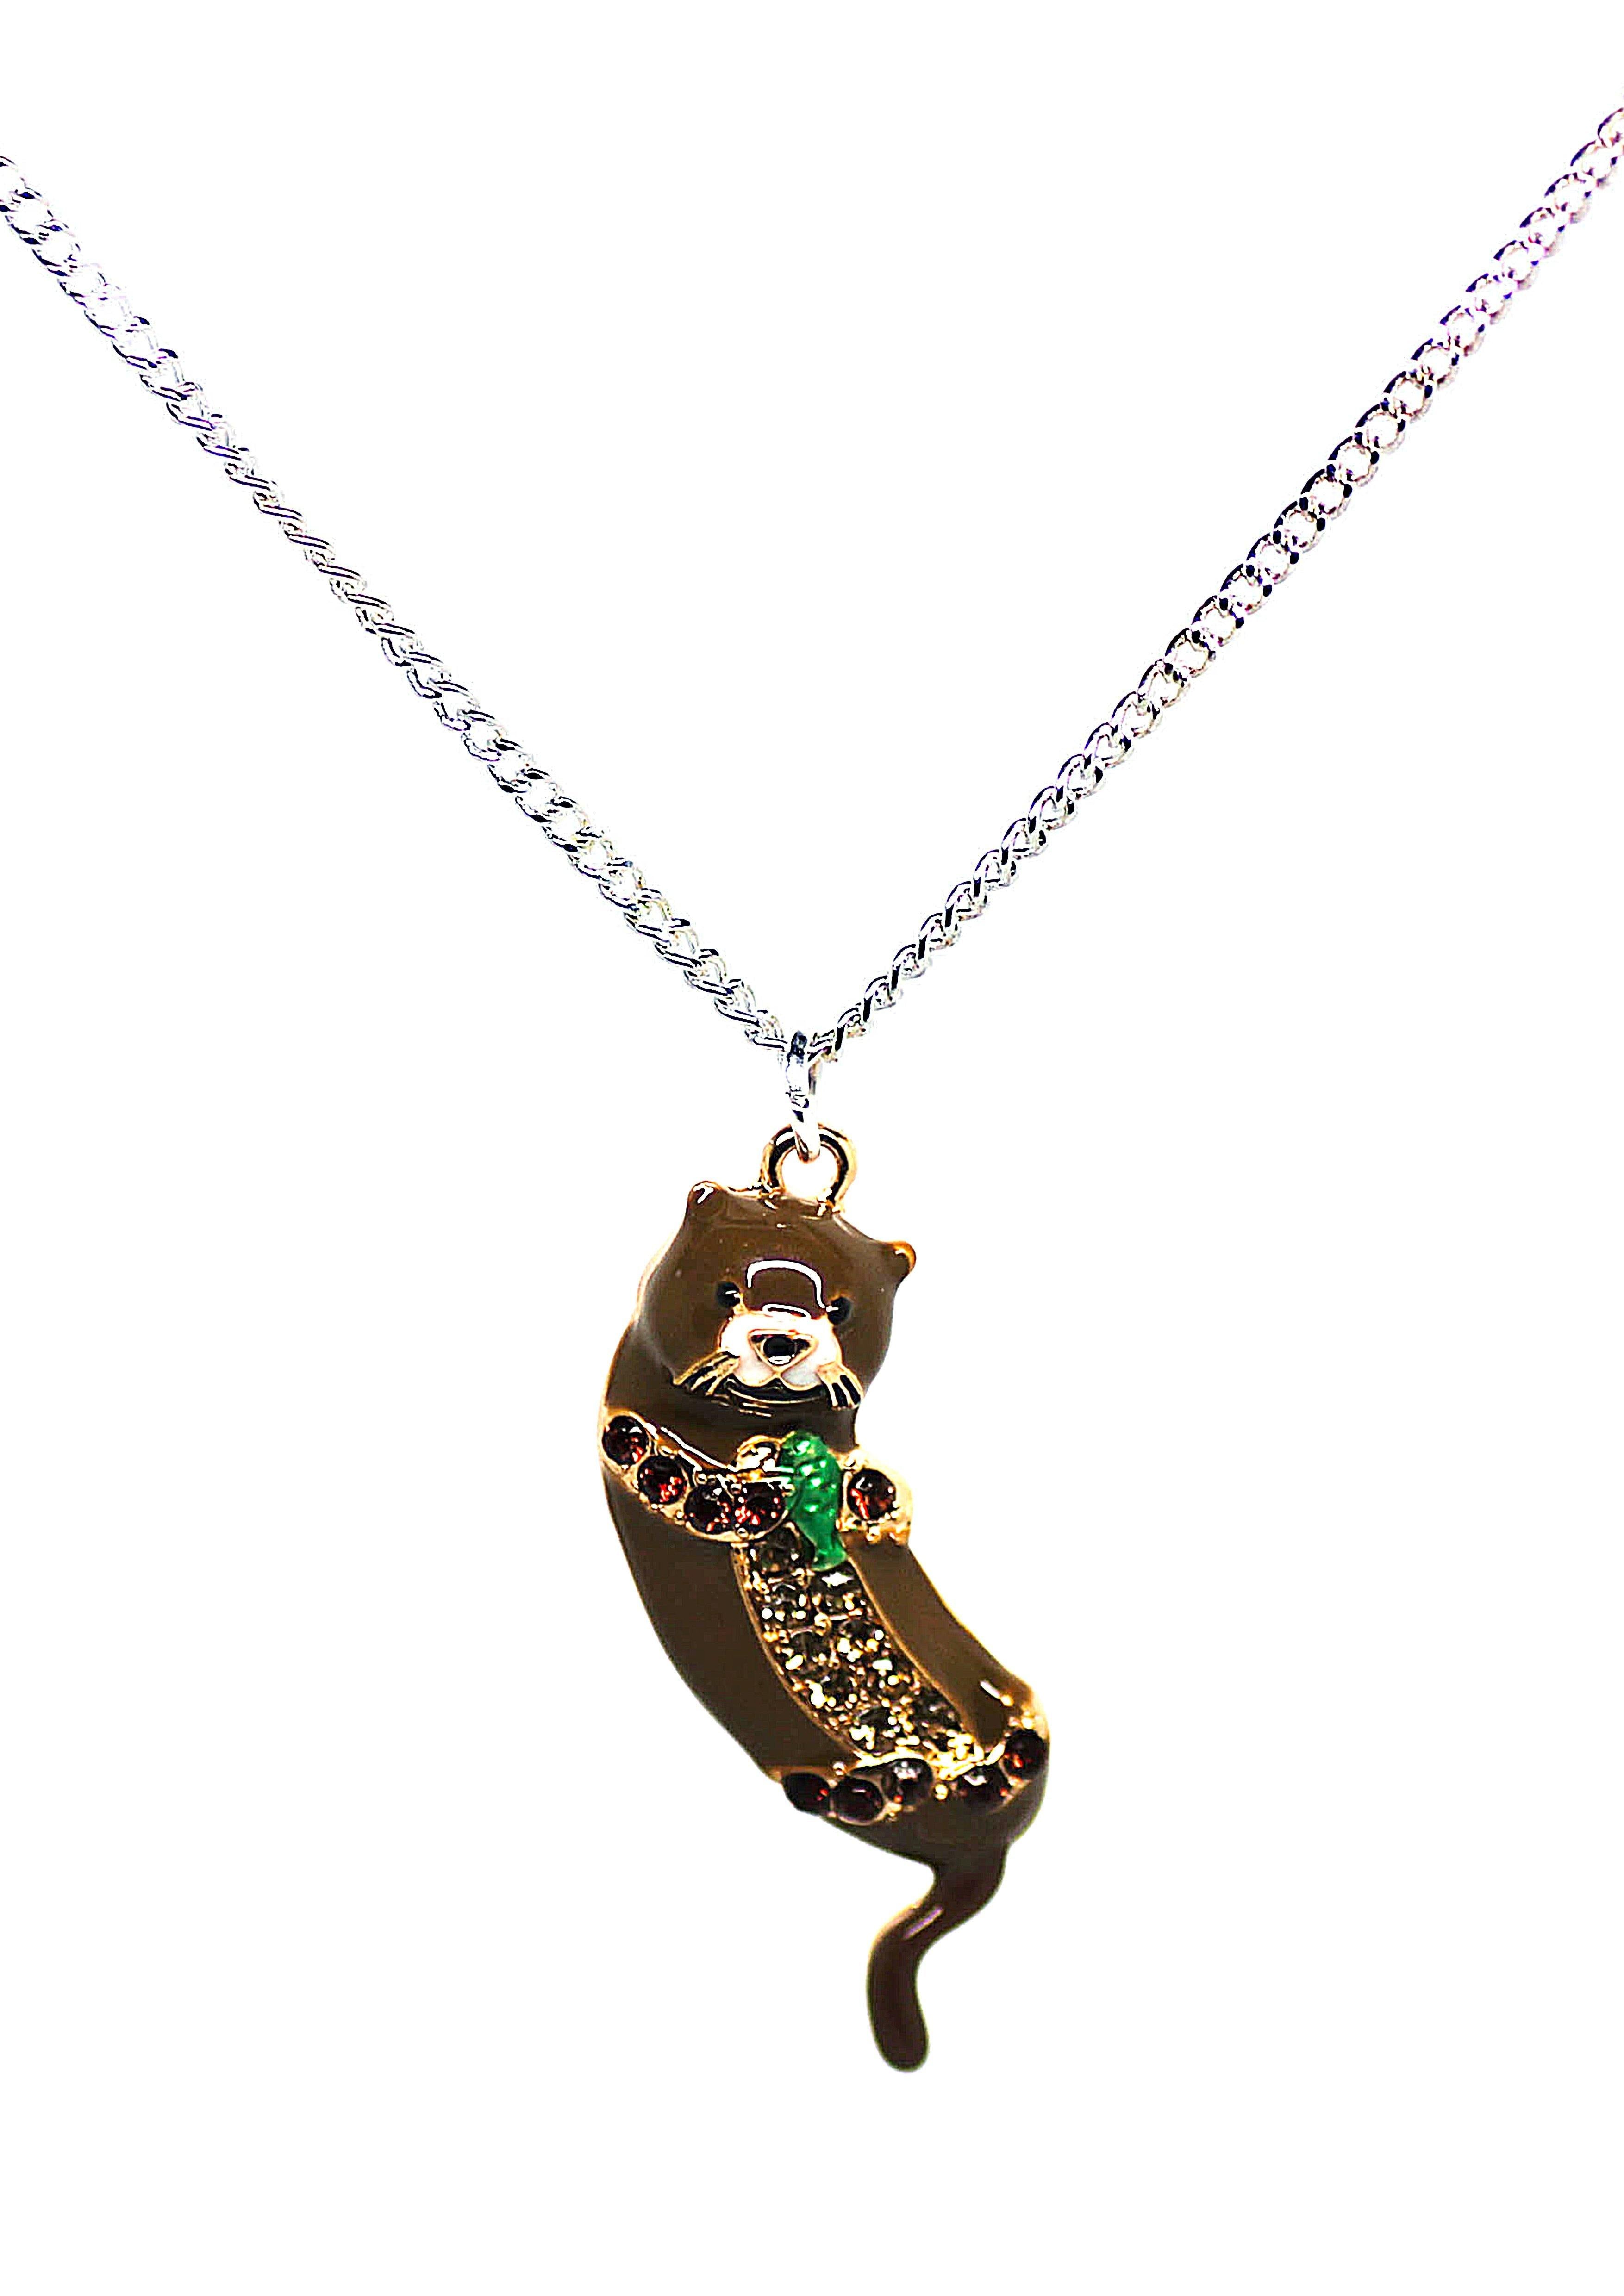 Otter Necklace - Wildtouch - Wildtouch